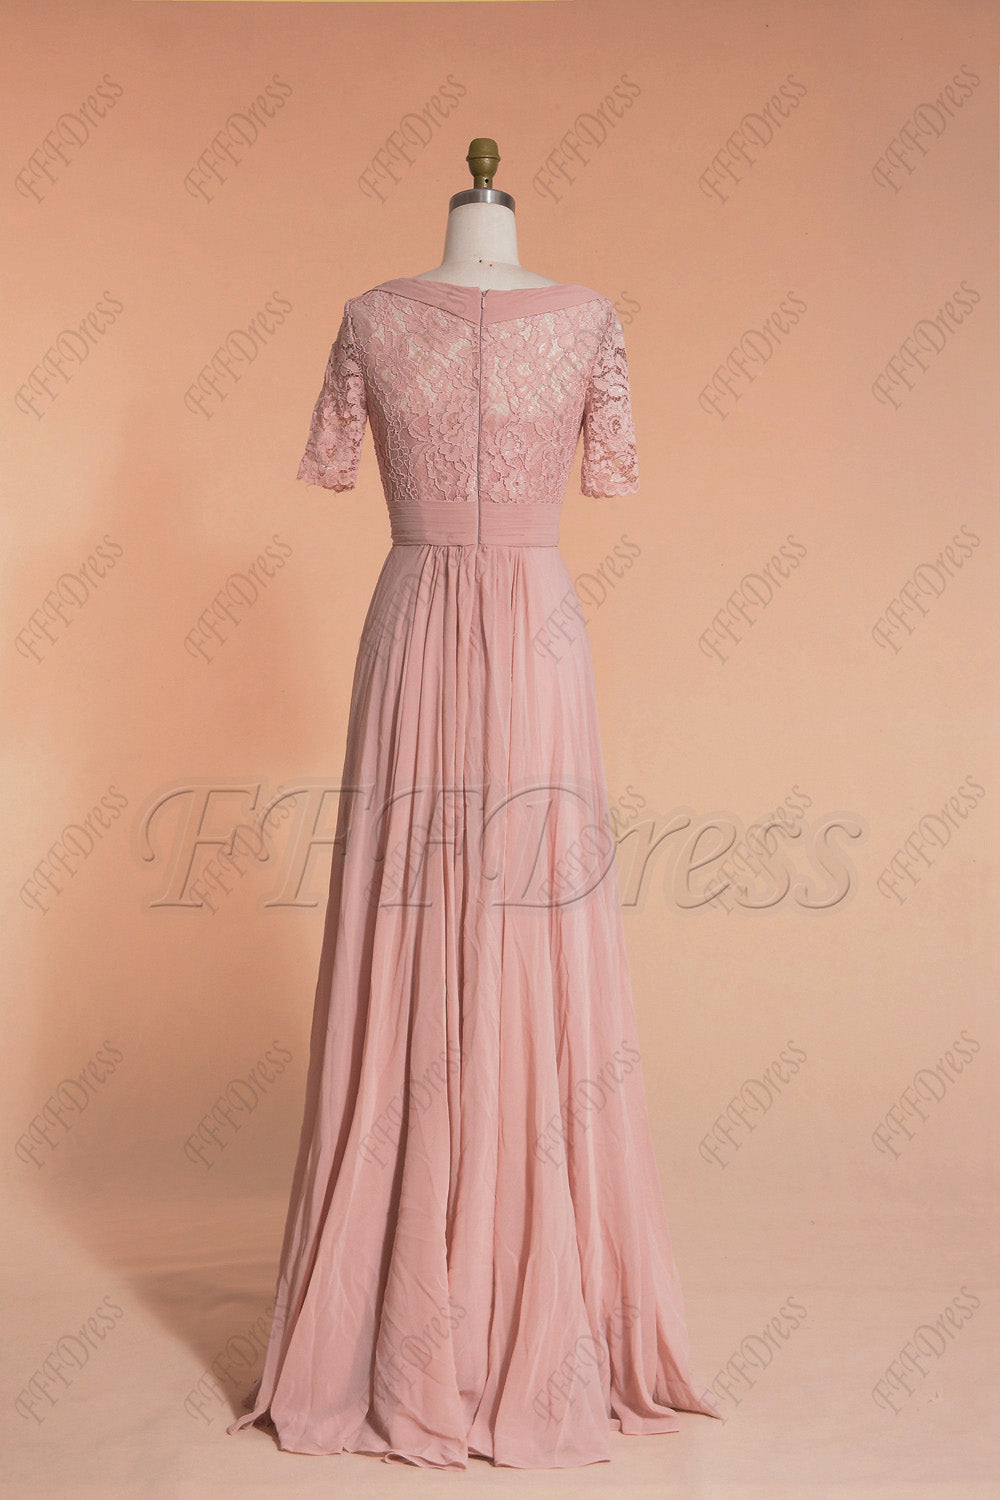 Dusty rose modest lace bridesmaid dresses elbow sleeves